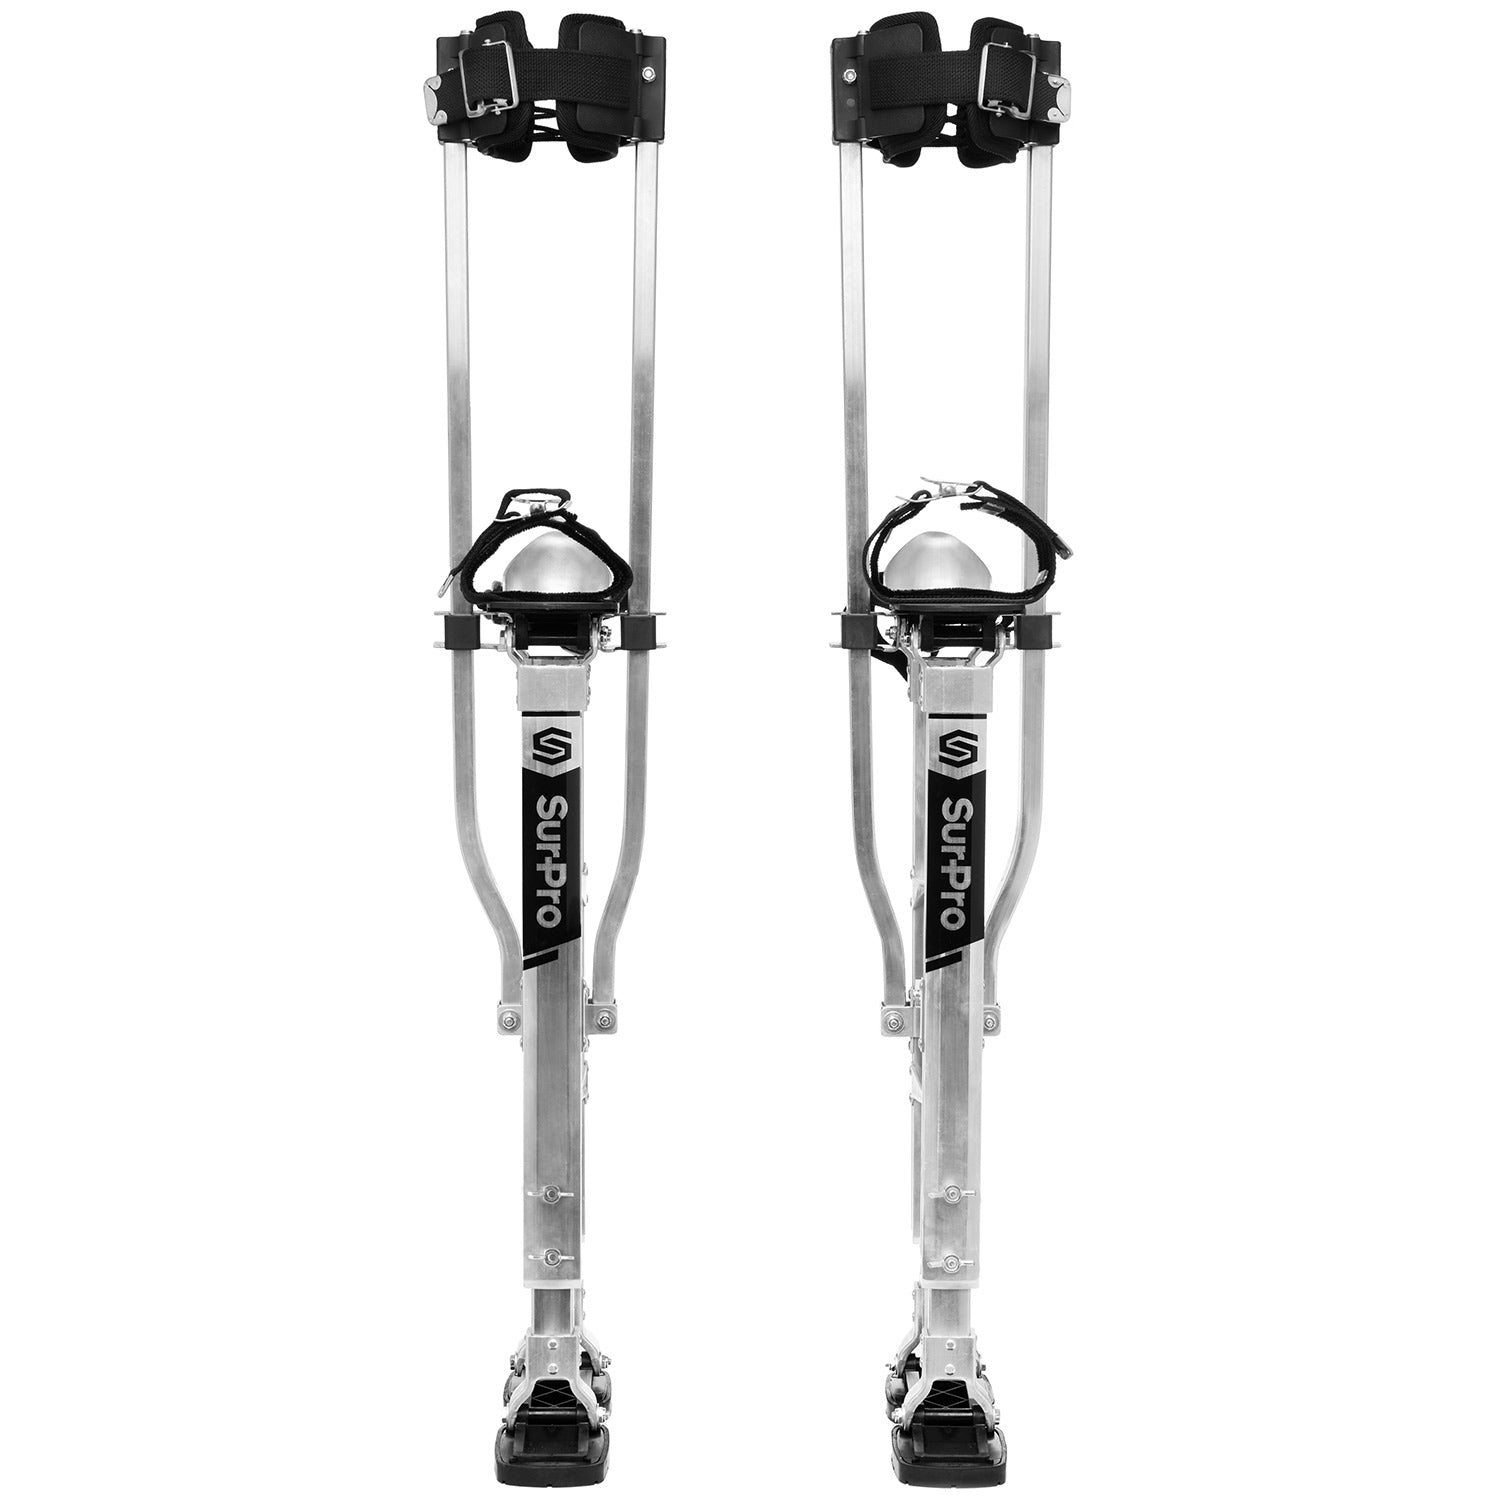 S2 Aluminum Drywall Stilts provide dual leg poles to increase balance and stability